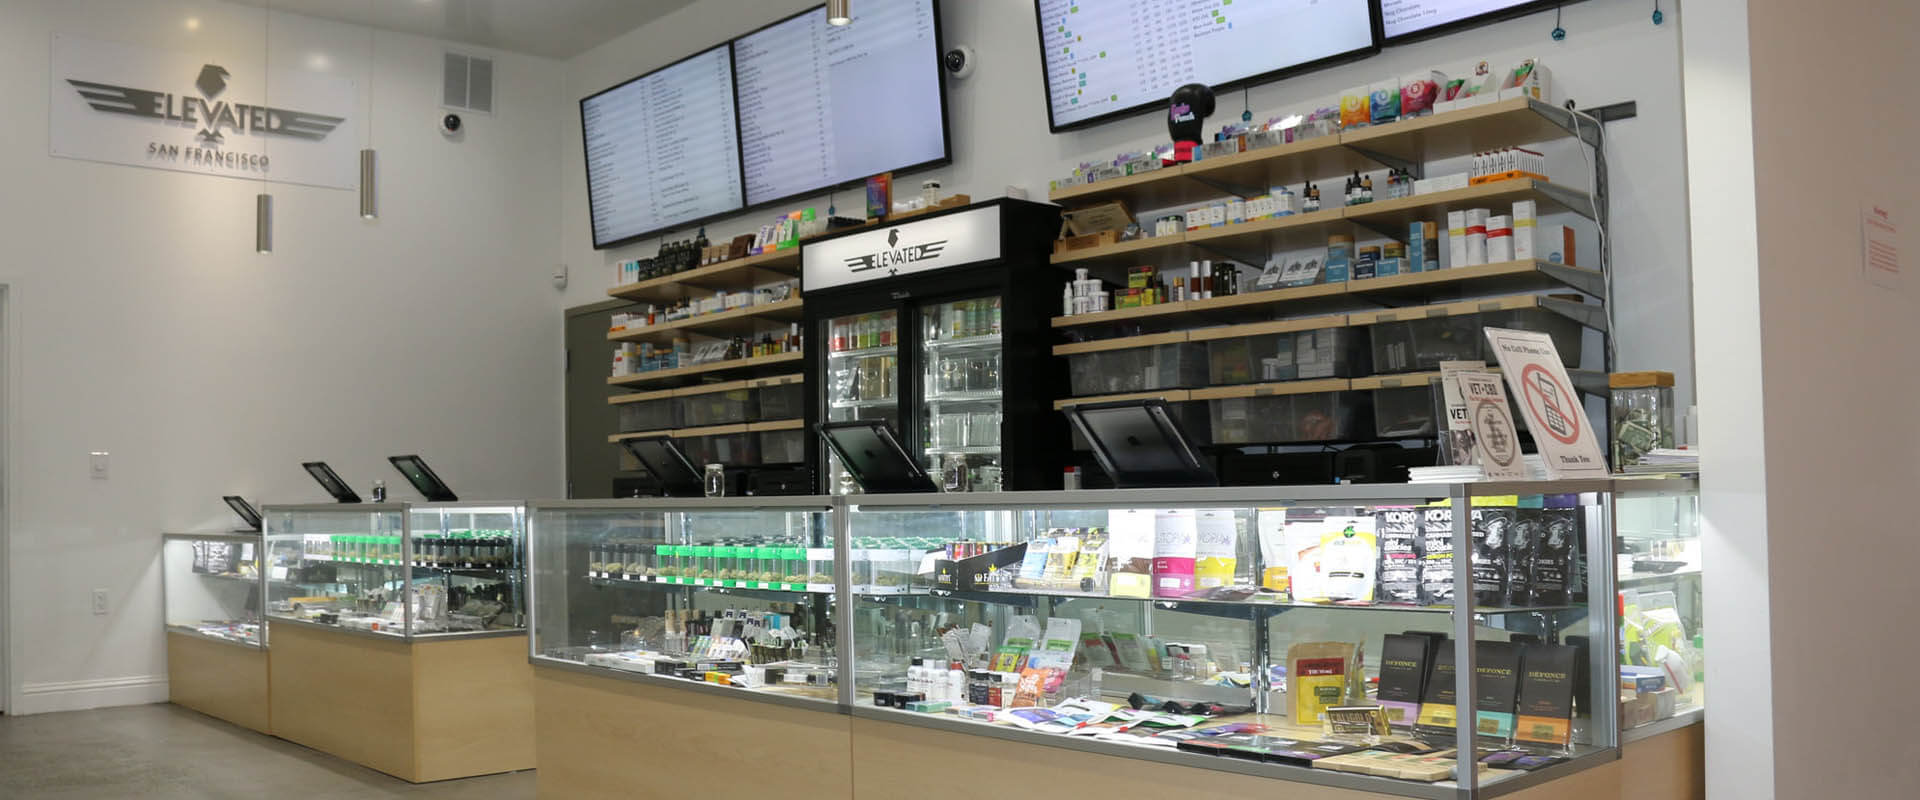 Few things to consider while selecting a cannabis dispensary in San Francisco